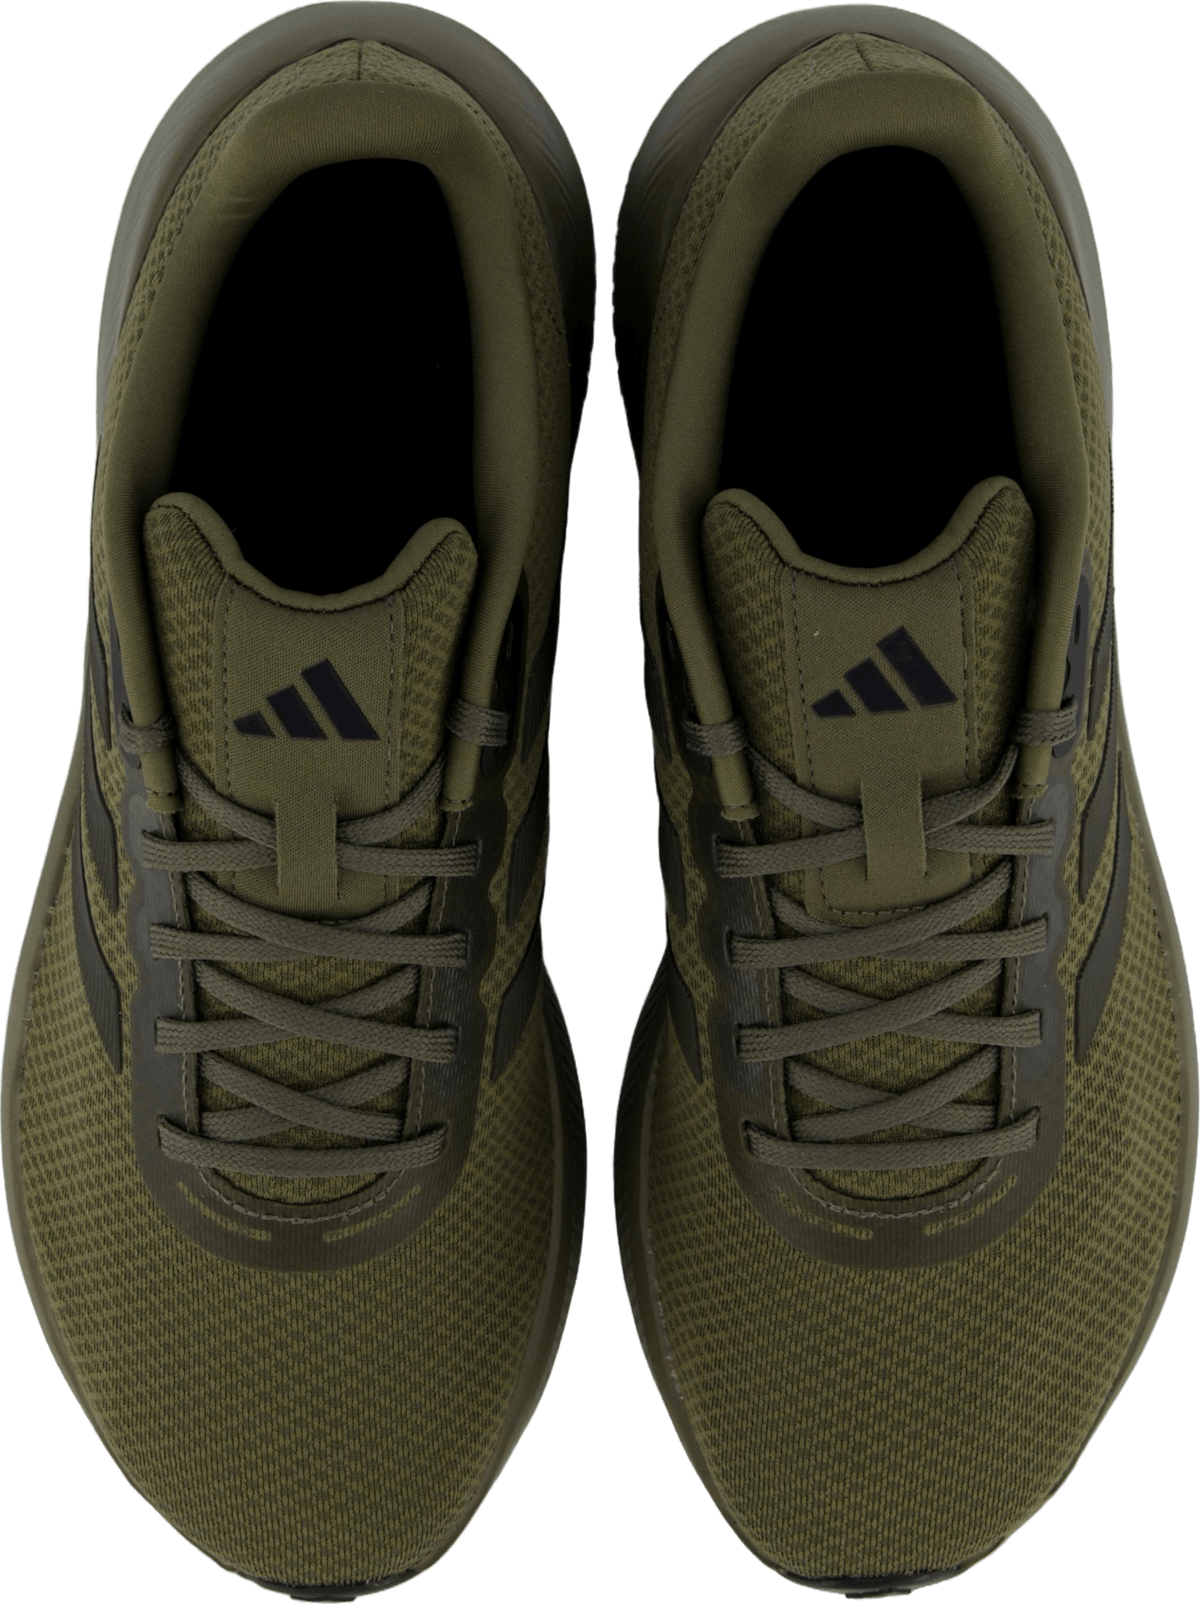 Runfalcon 3.0 Shoes Olive Strata / Shadow Olive / Core Black